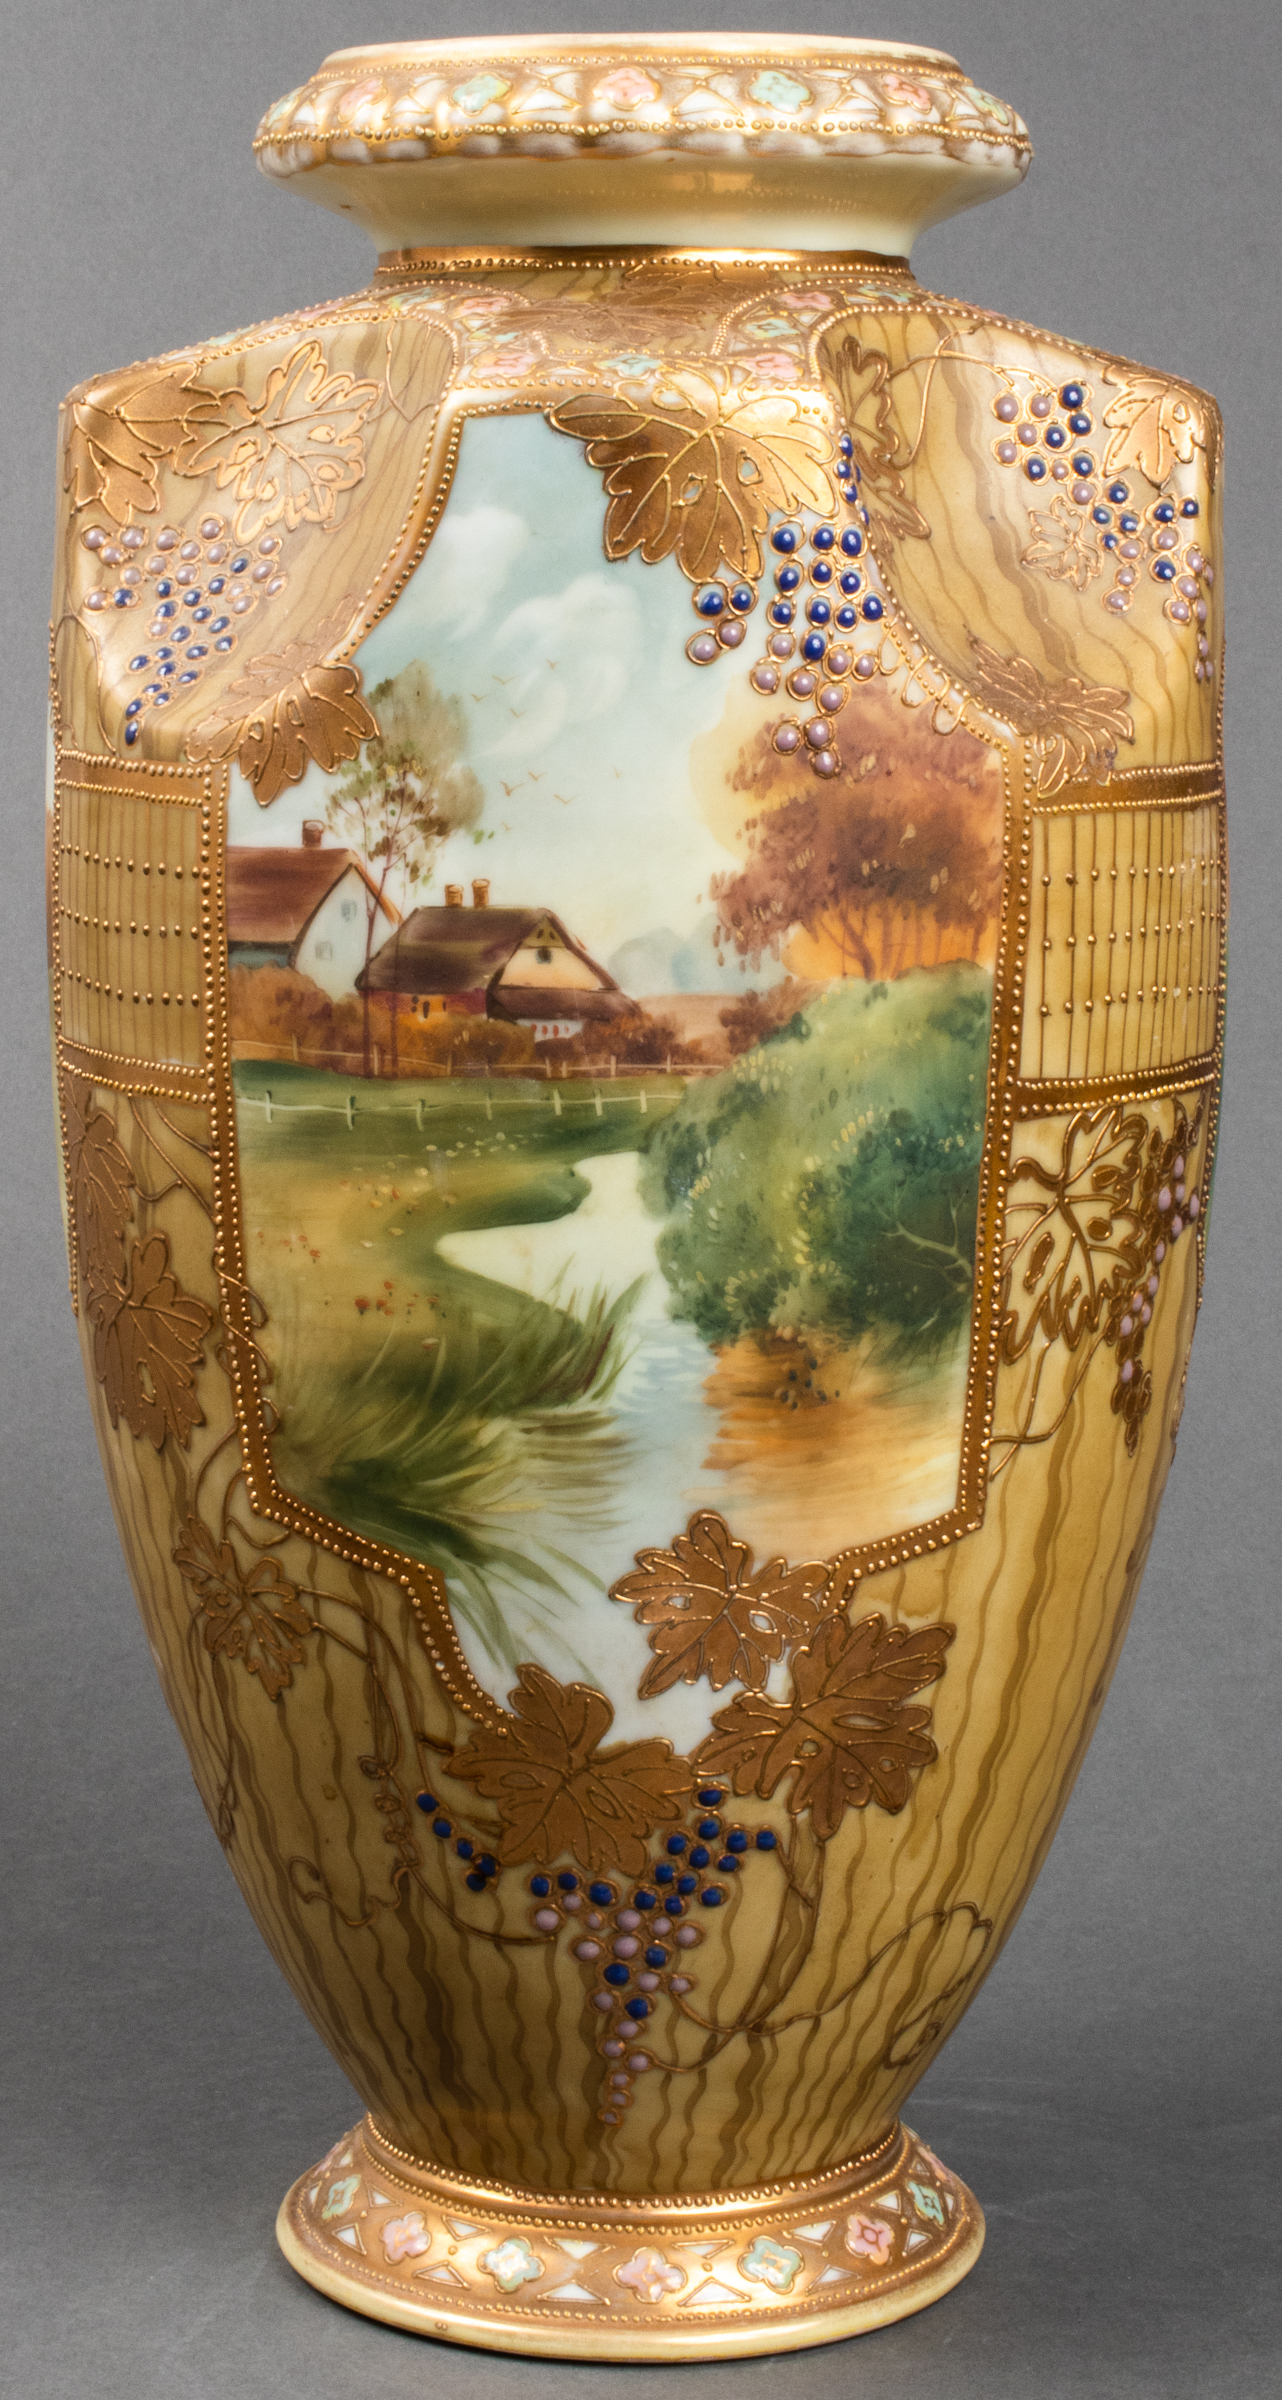 NIPPON LARGE HAND-PAINTED PORCELAIN